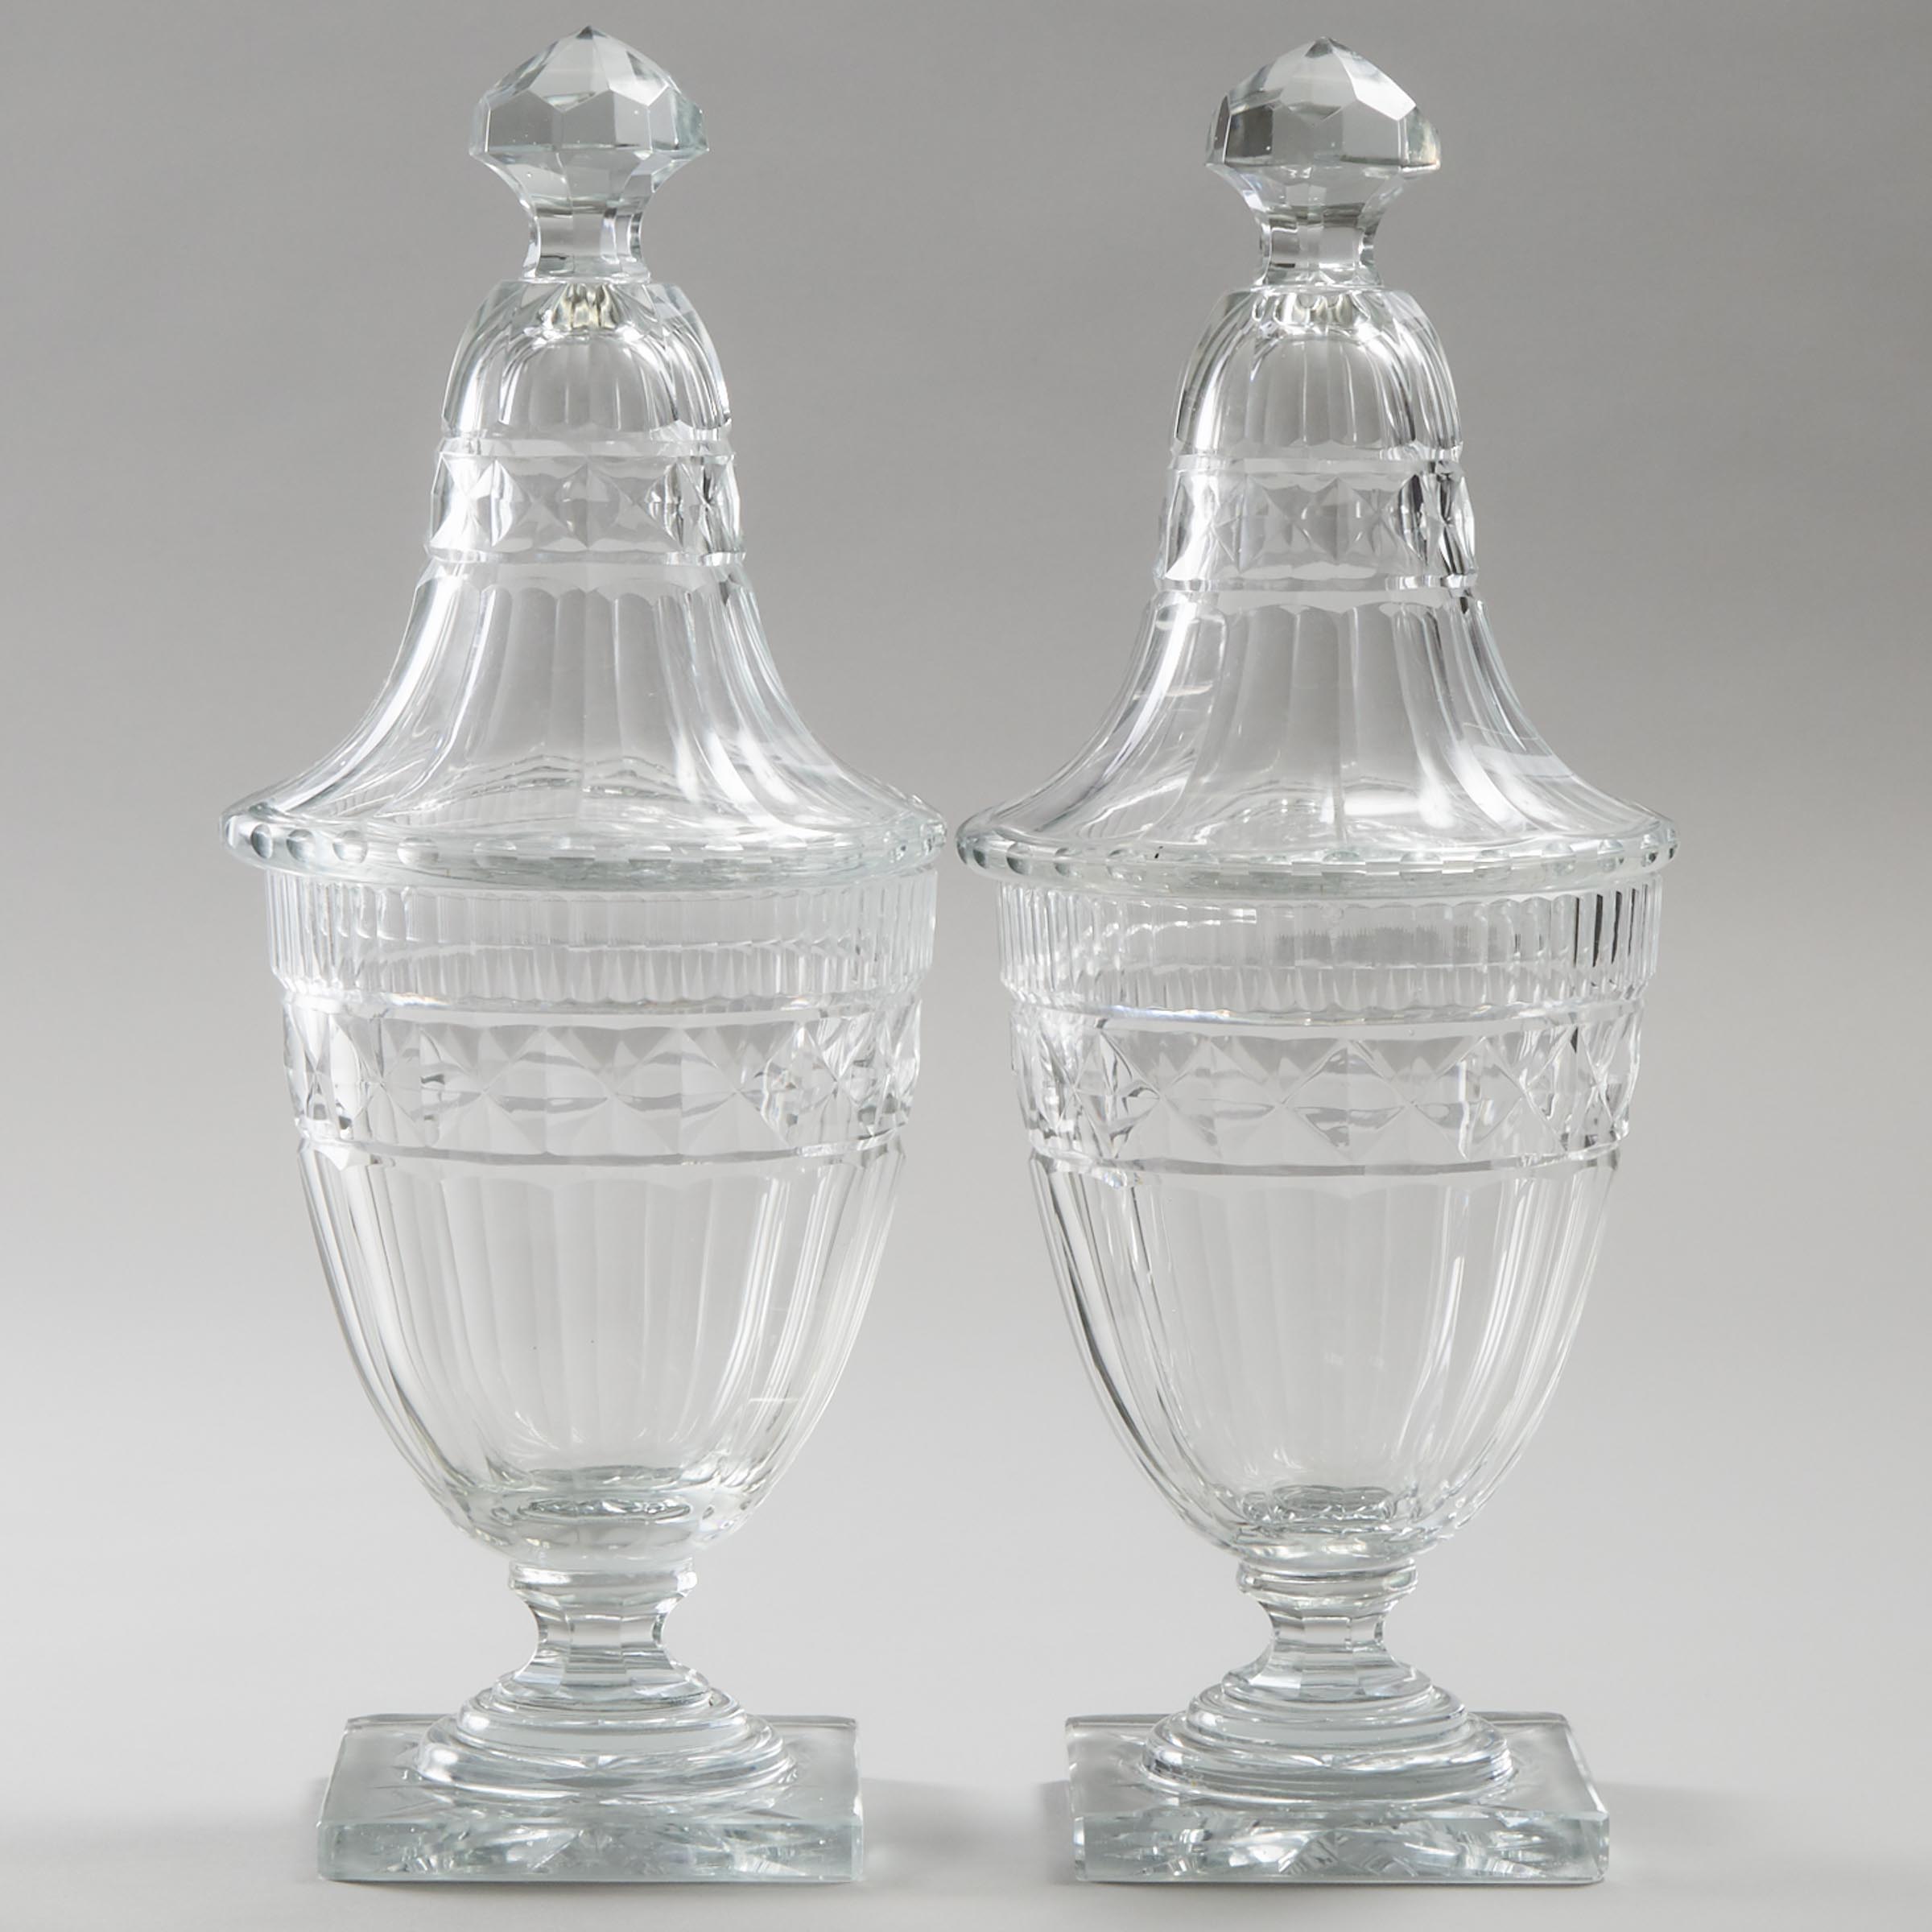 Pair of English Cut Glass Sweetmeat Vases and Covers, 19th century